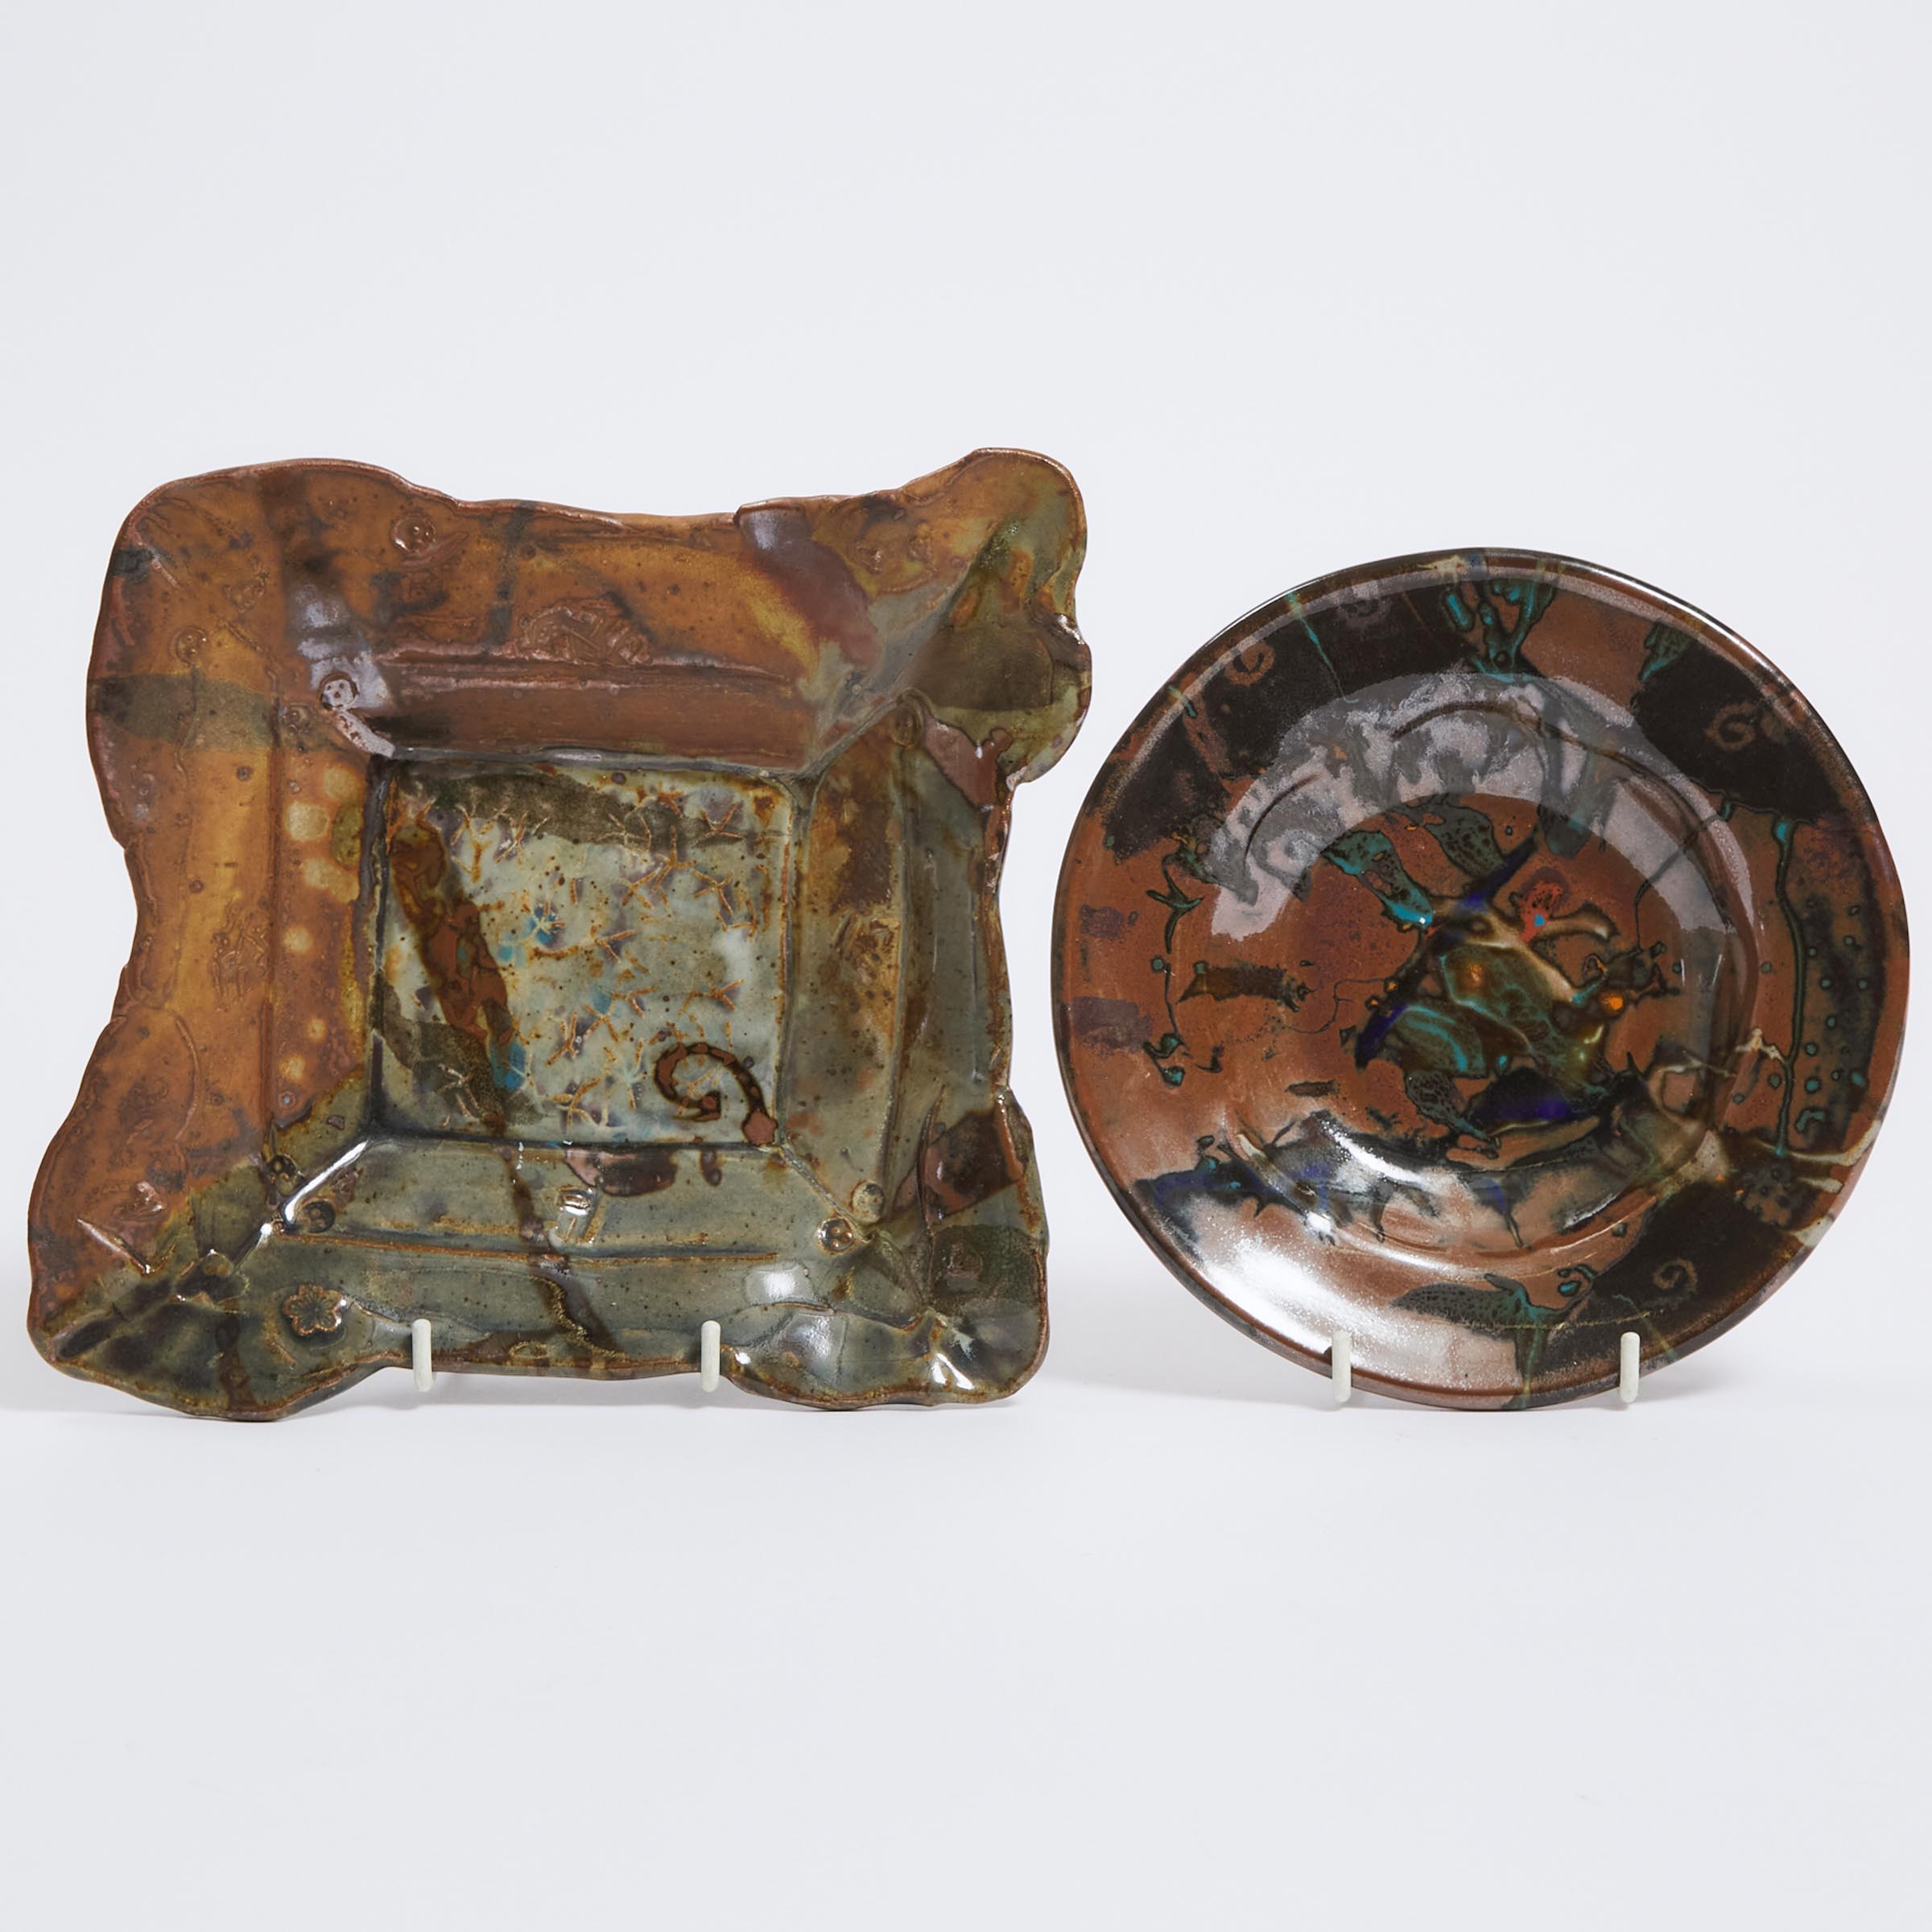 John Glick (American, 1938-2017), Two Stoneware Dishes, Plum Tree Pottery, late 20th/early 21st century